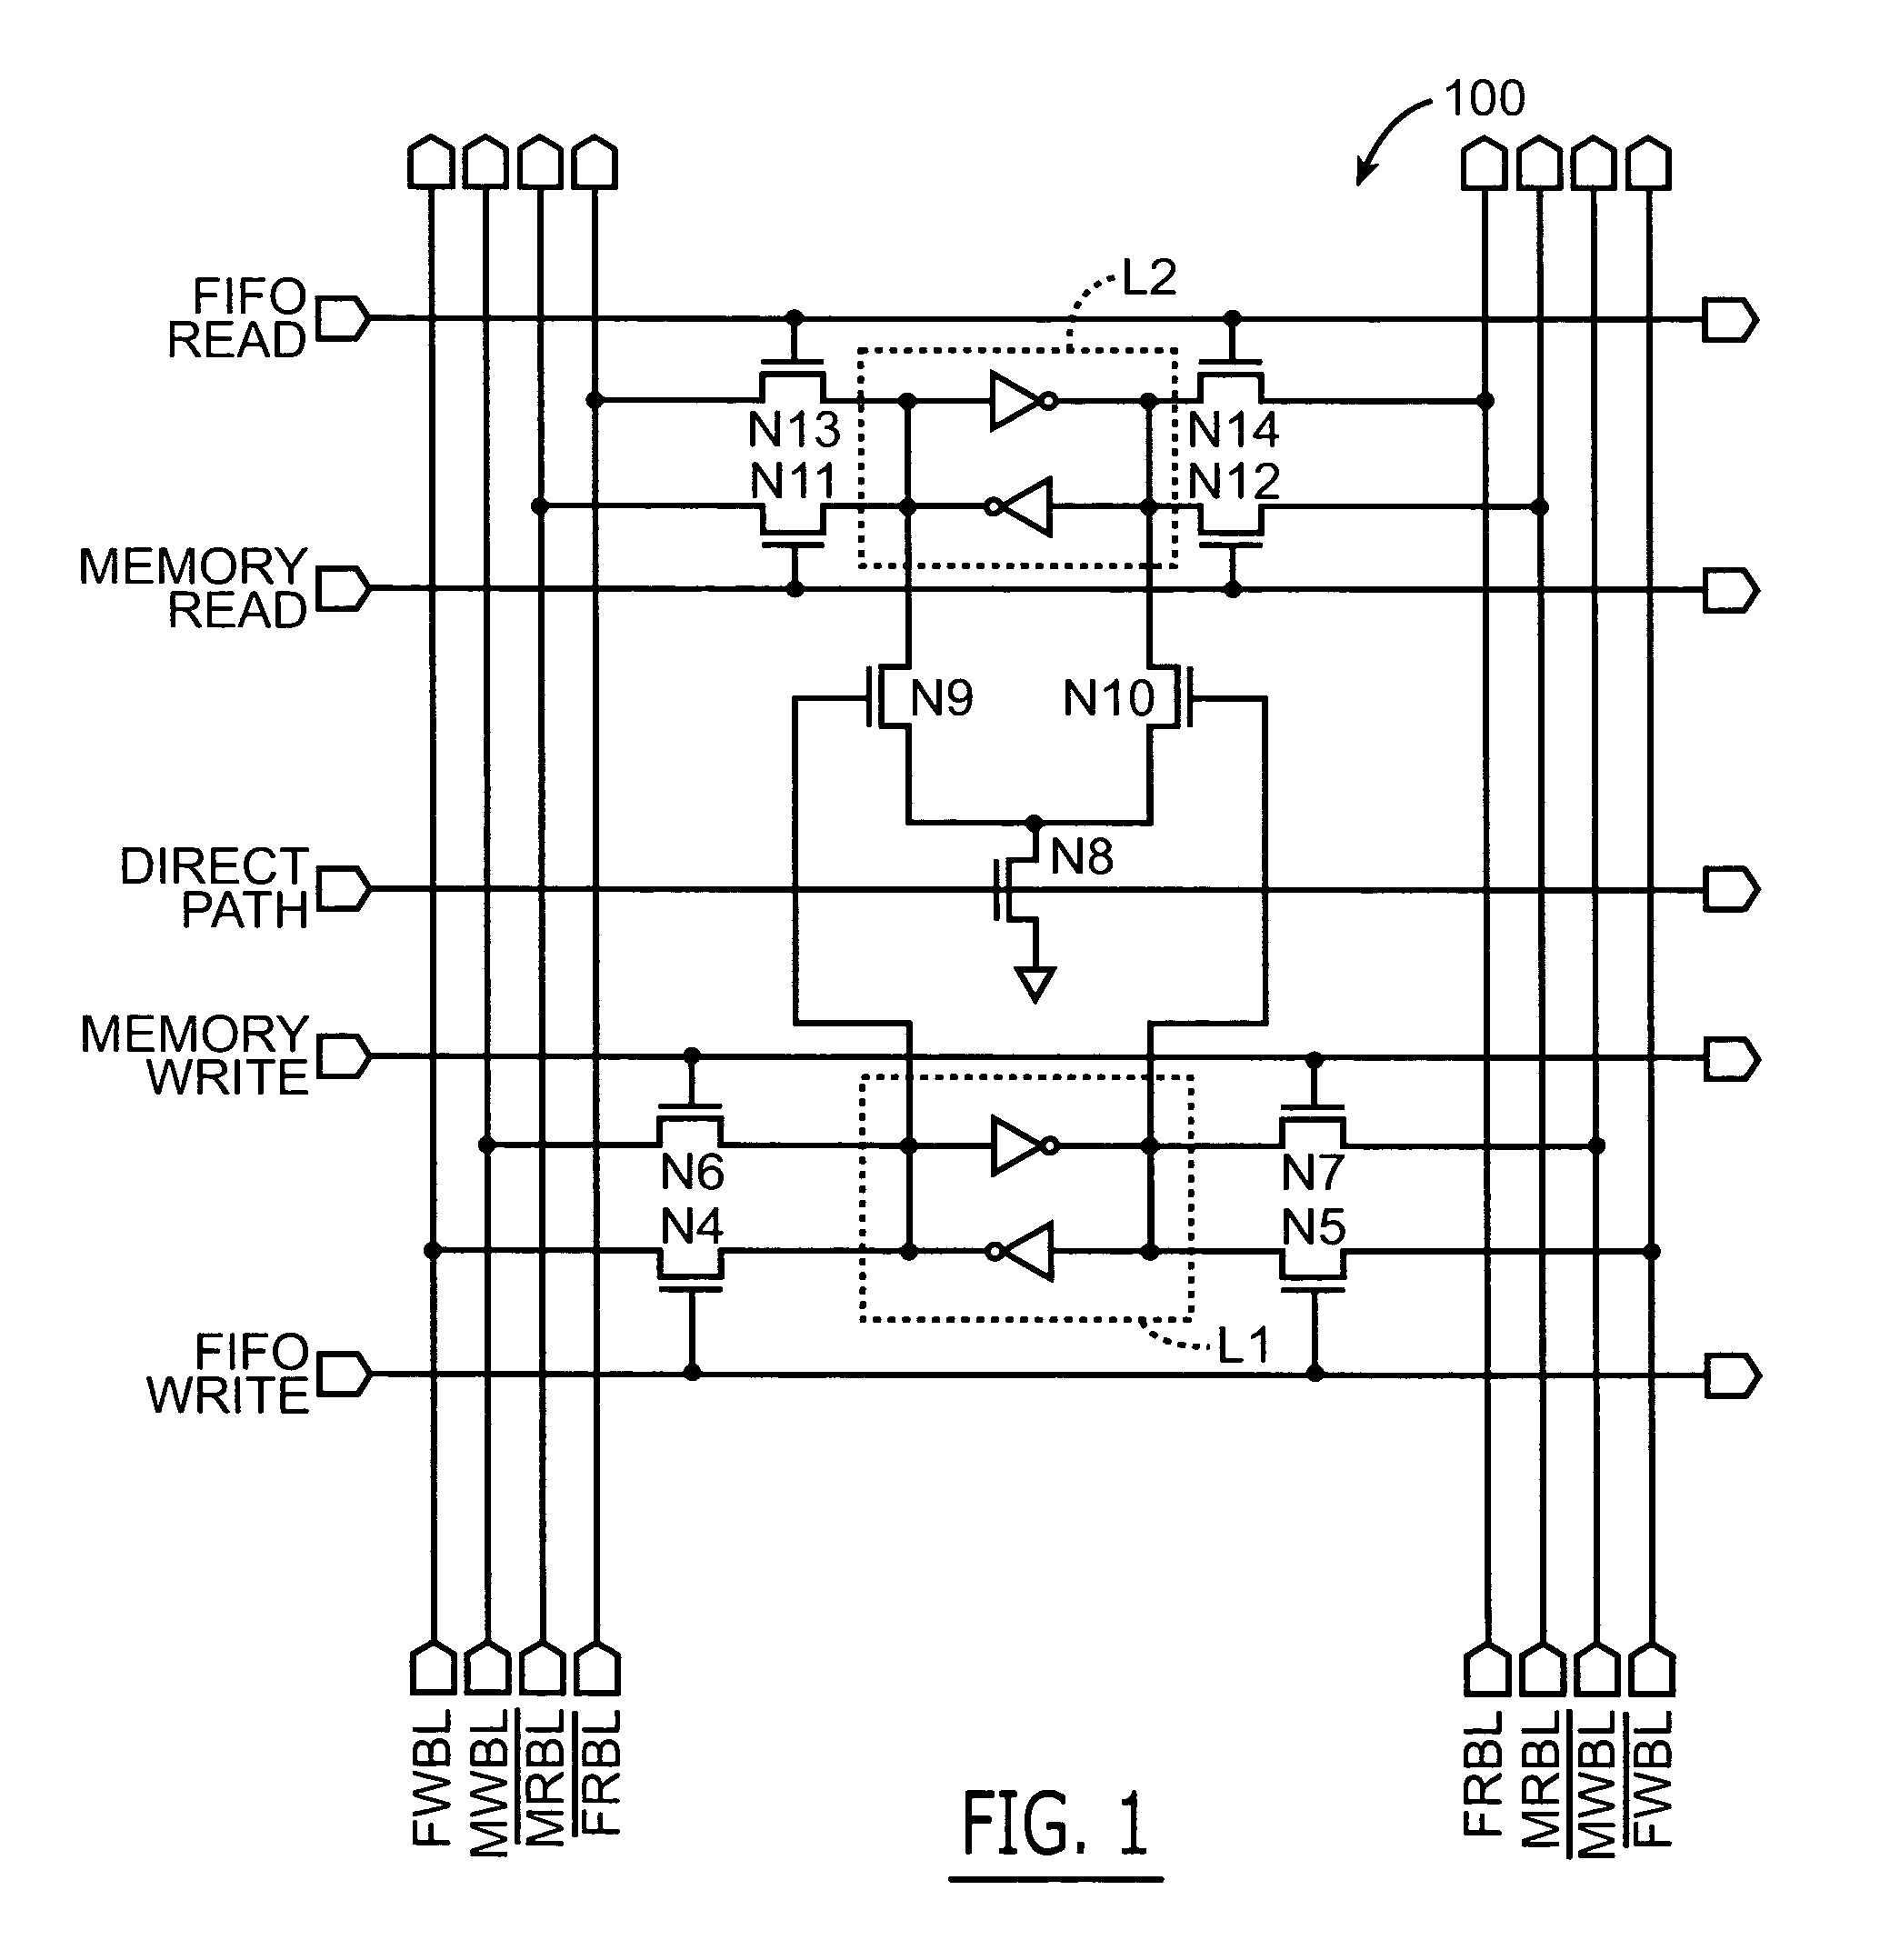 Multi-port memory cells for use in FIFO applications that support data transfers between cache and supplemental memory arrays